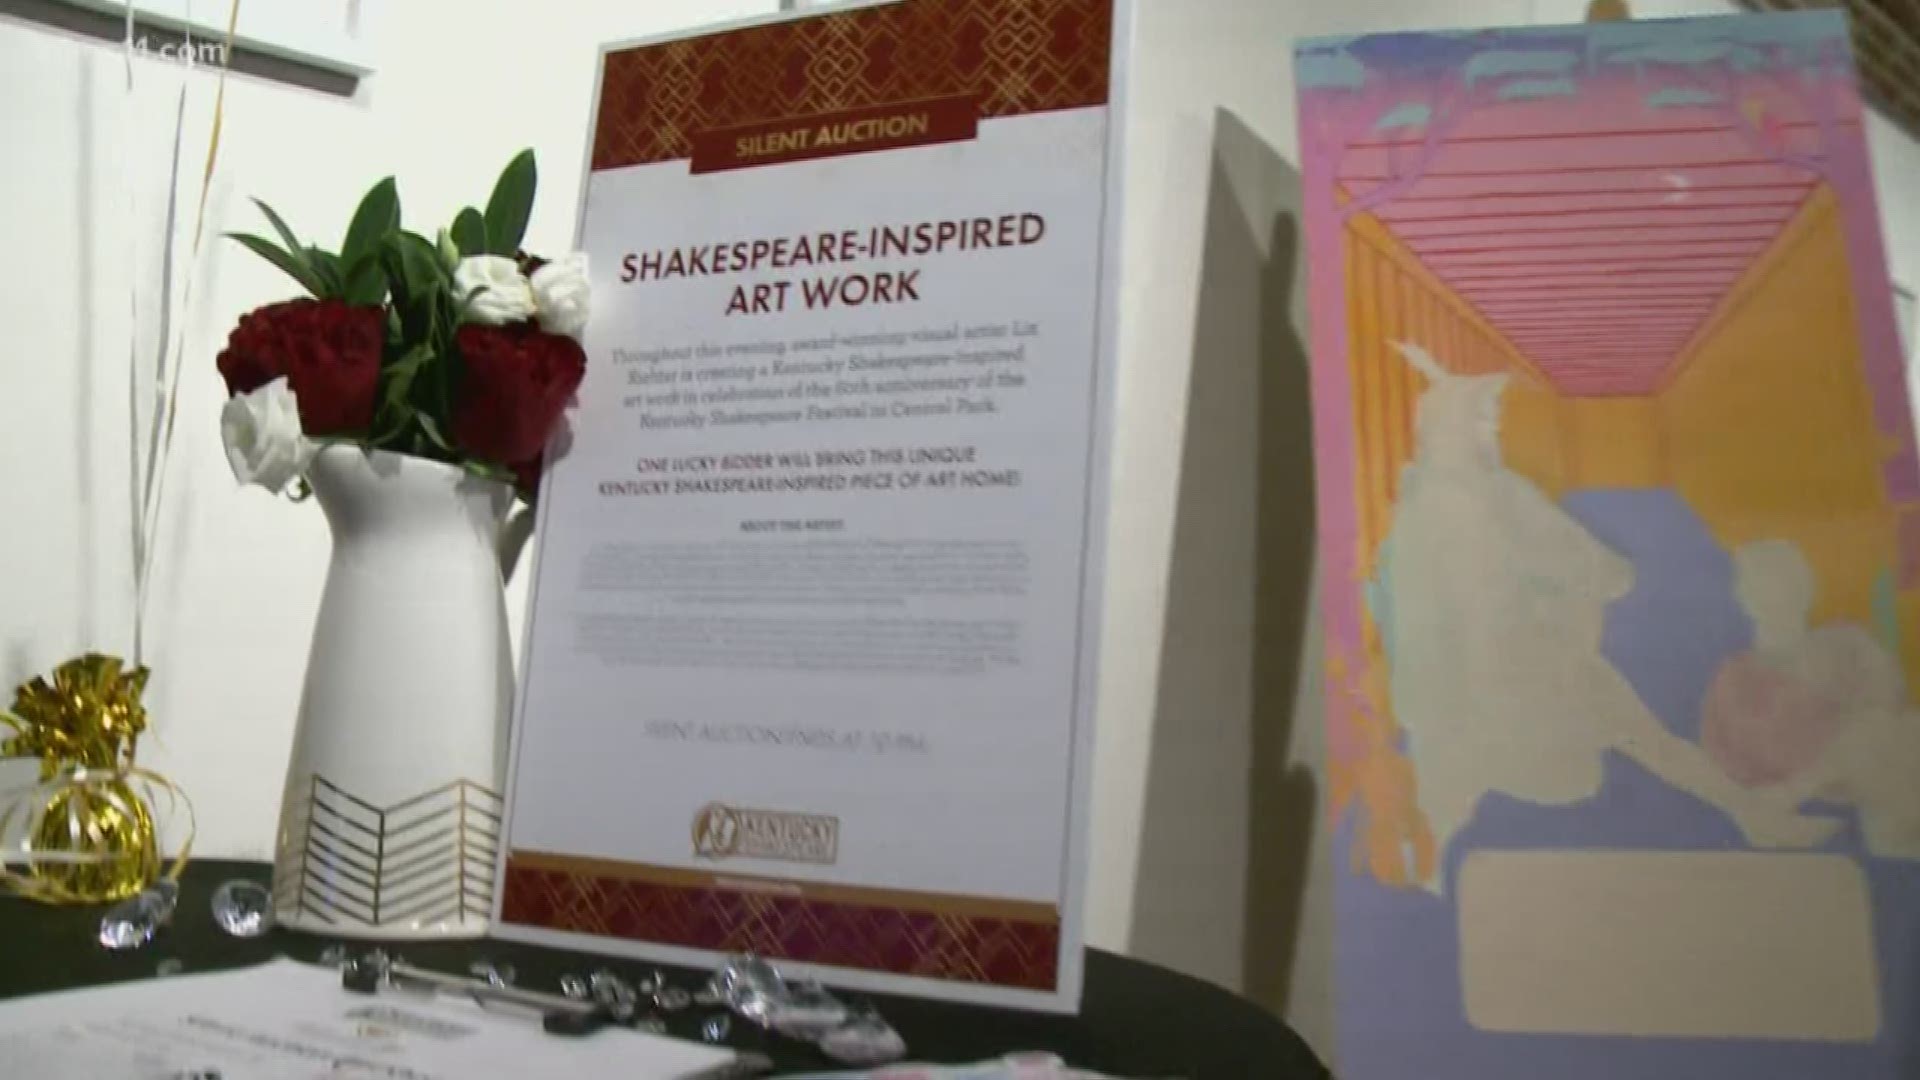 After a rainy and rocky start to last year’s Shakespeare in the Park, organizers with Kentucky Shakespeare kicked off their season with a 60th anniversary gala.